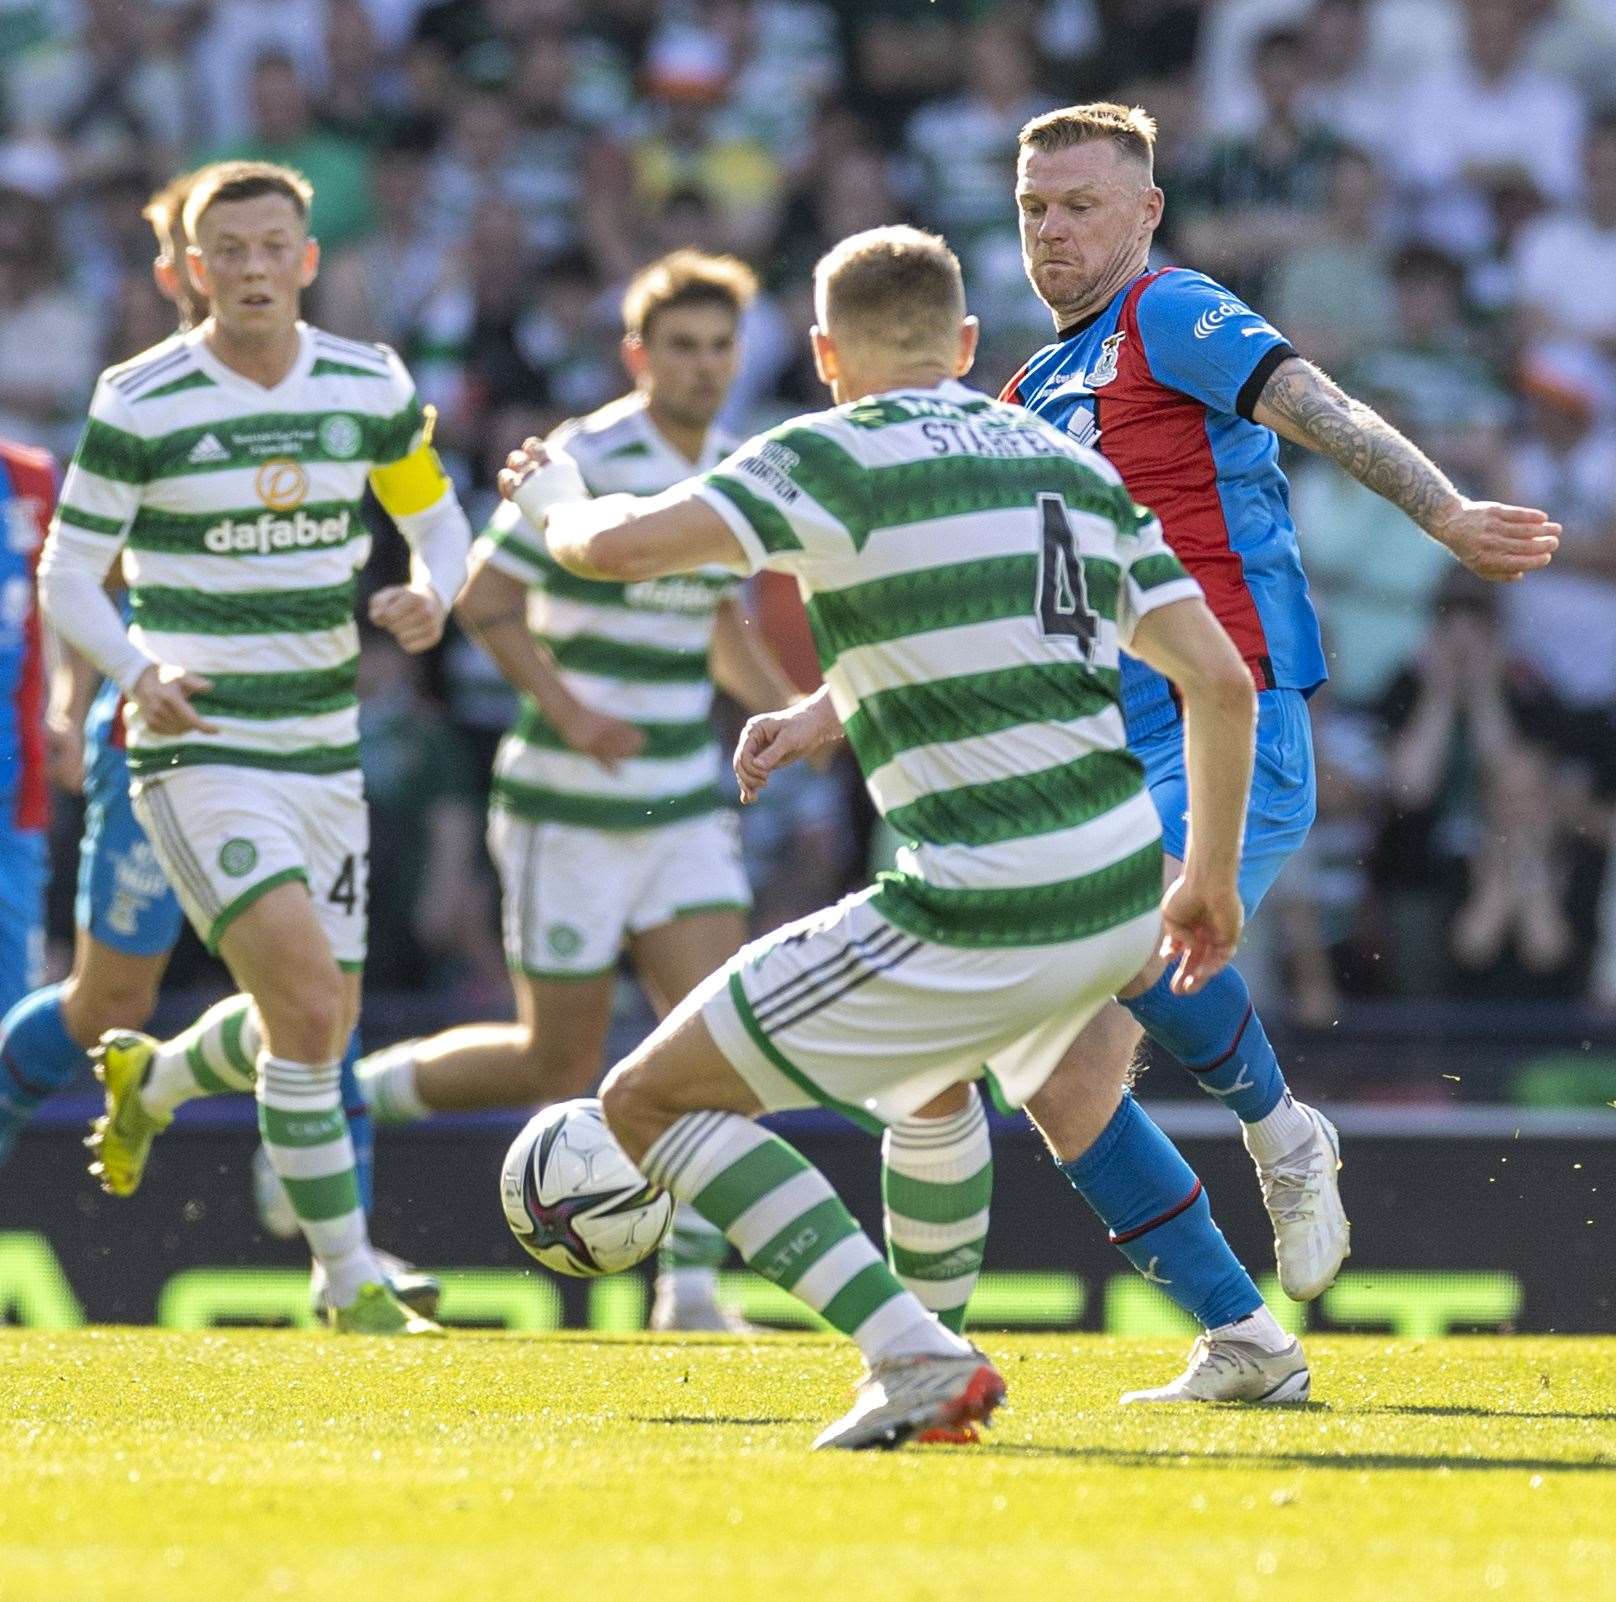 Celtic wear the same green and white hooped shirts as Buckie Thistle